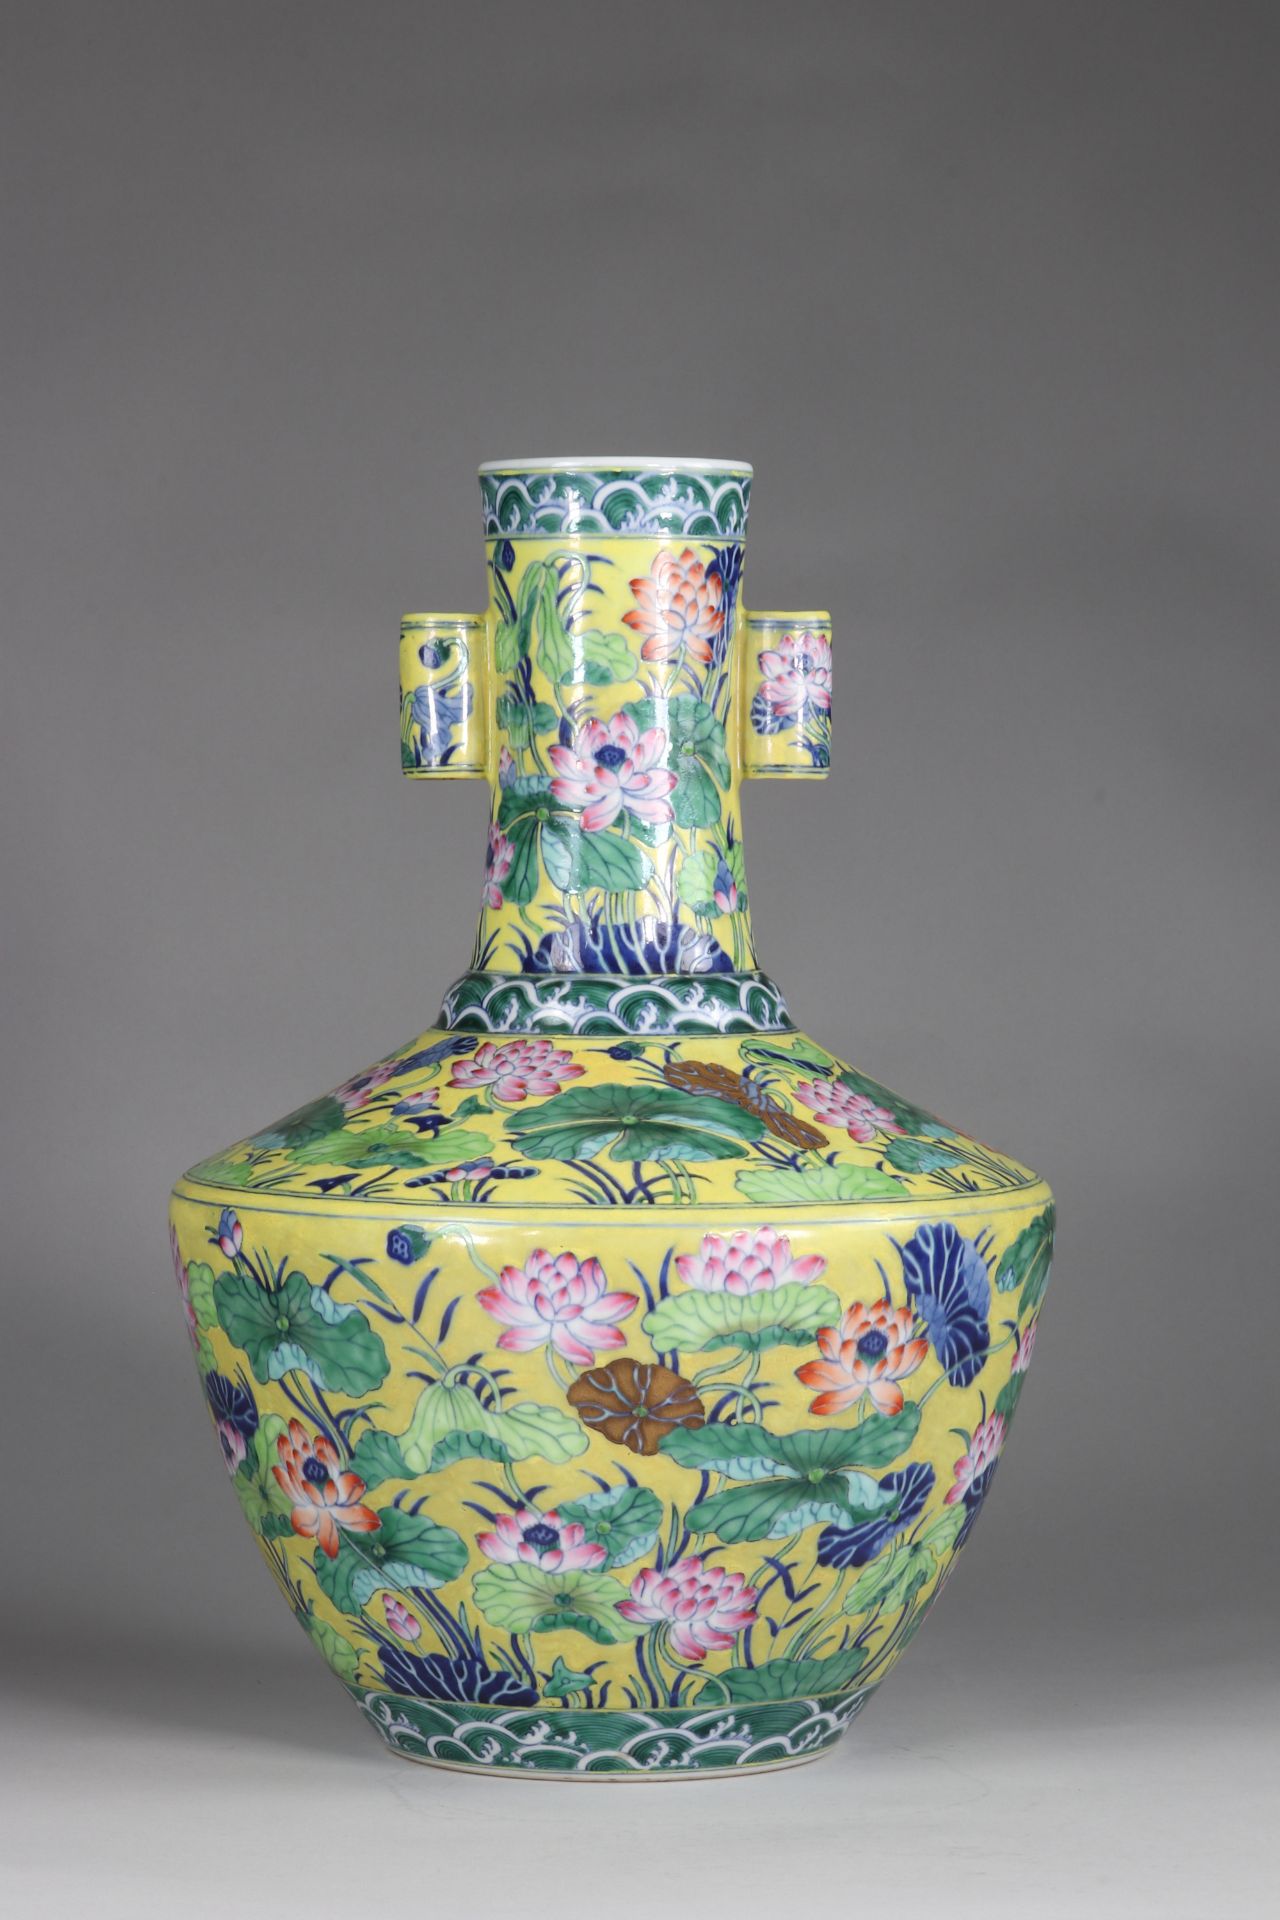 CHINA vase of archaic shape, known as -HU-, created during the Reign of Emperor Qianlong (1736-1795) - Image 4 of 9